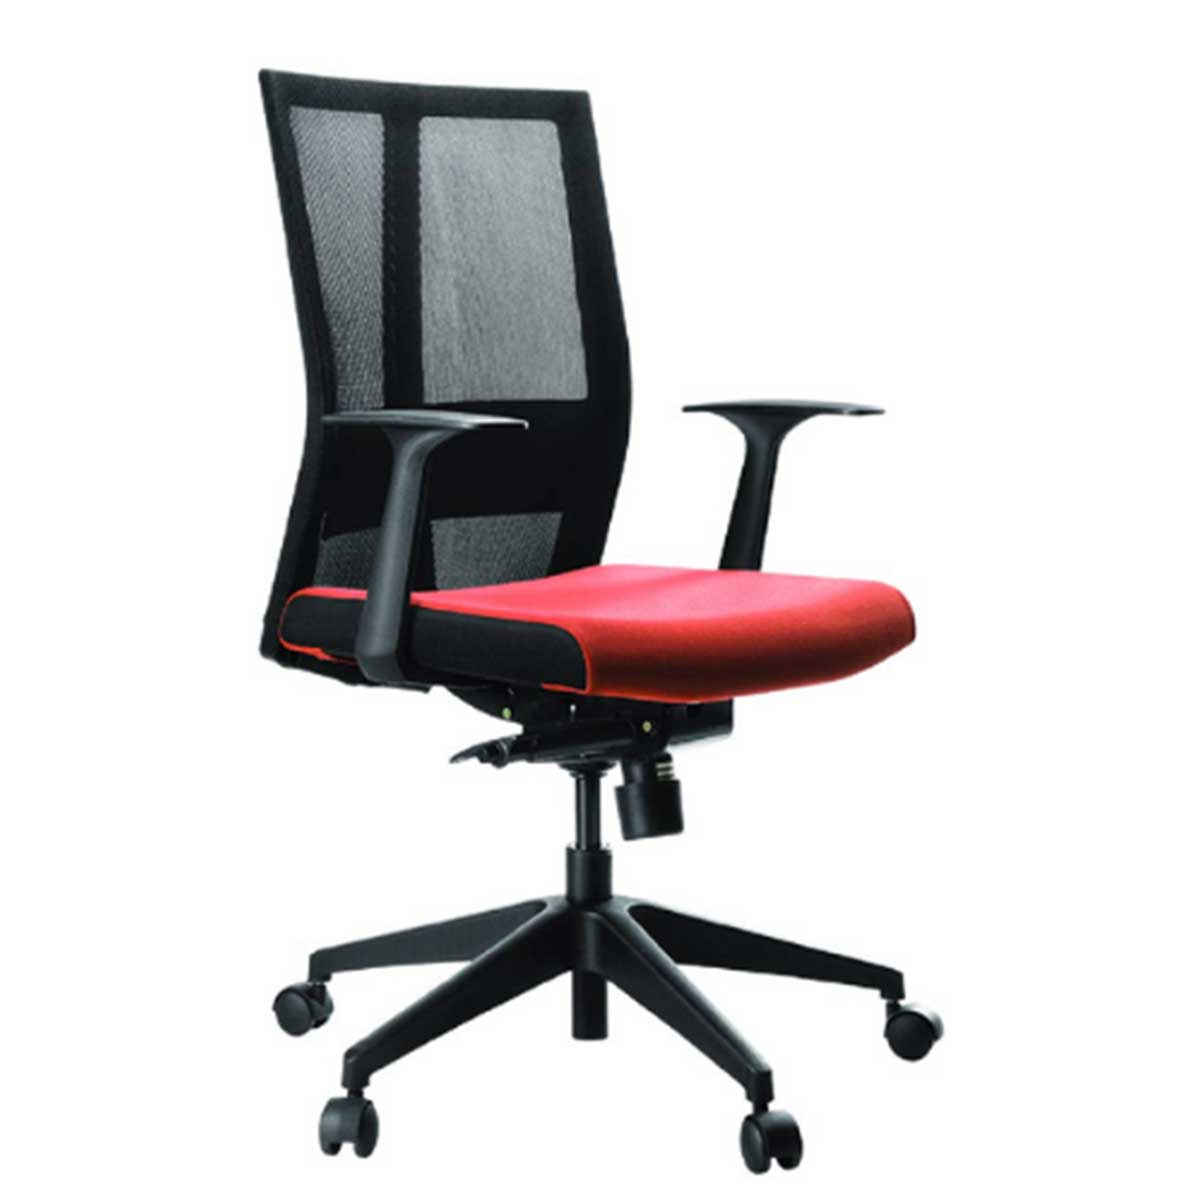 Conference Chair Manufacturers, Suppliers in Noida Sector 77